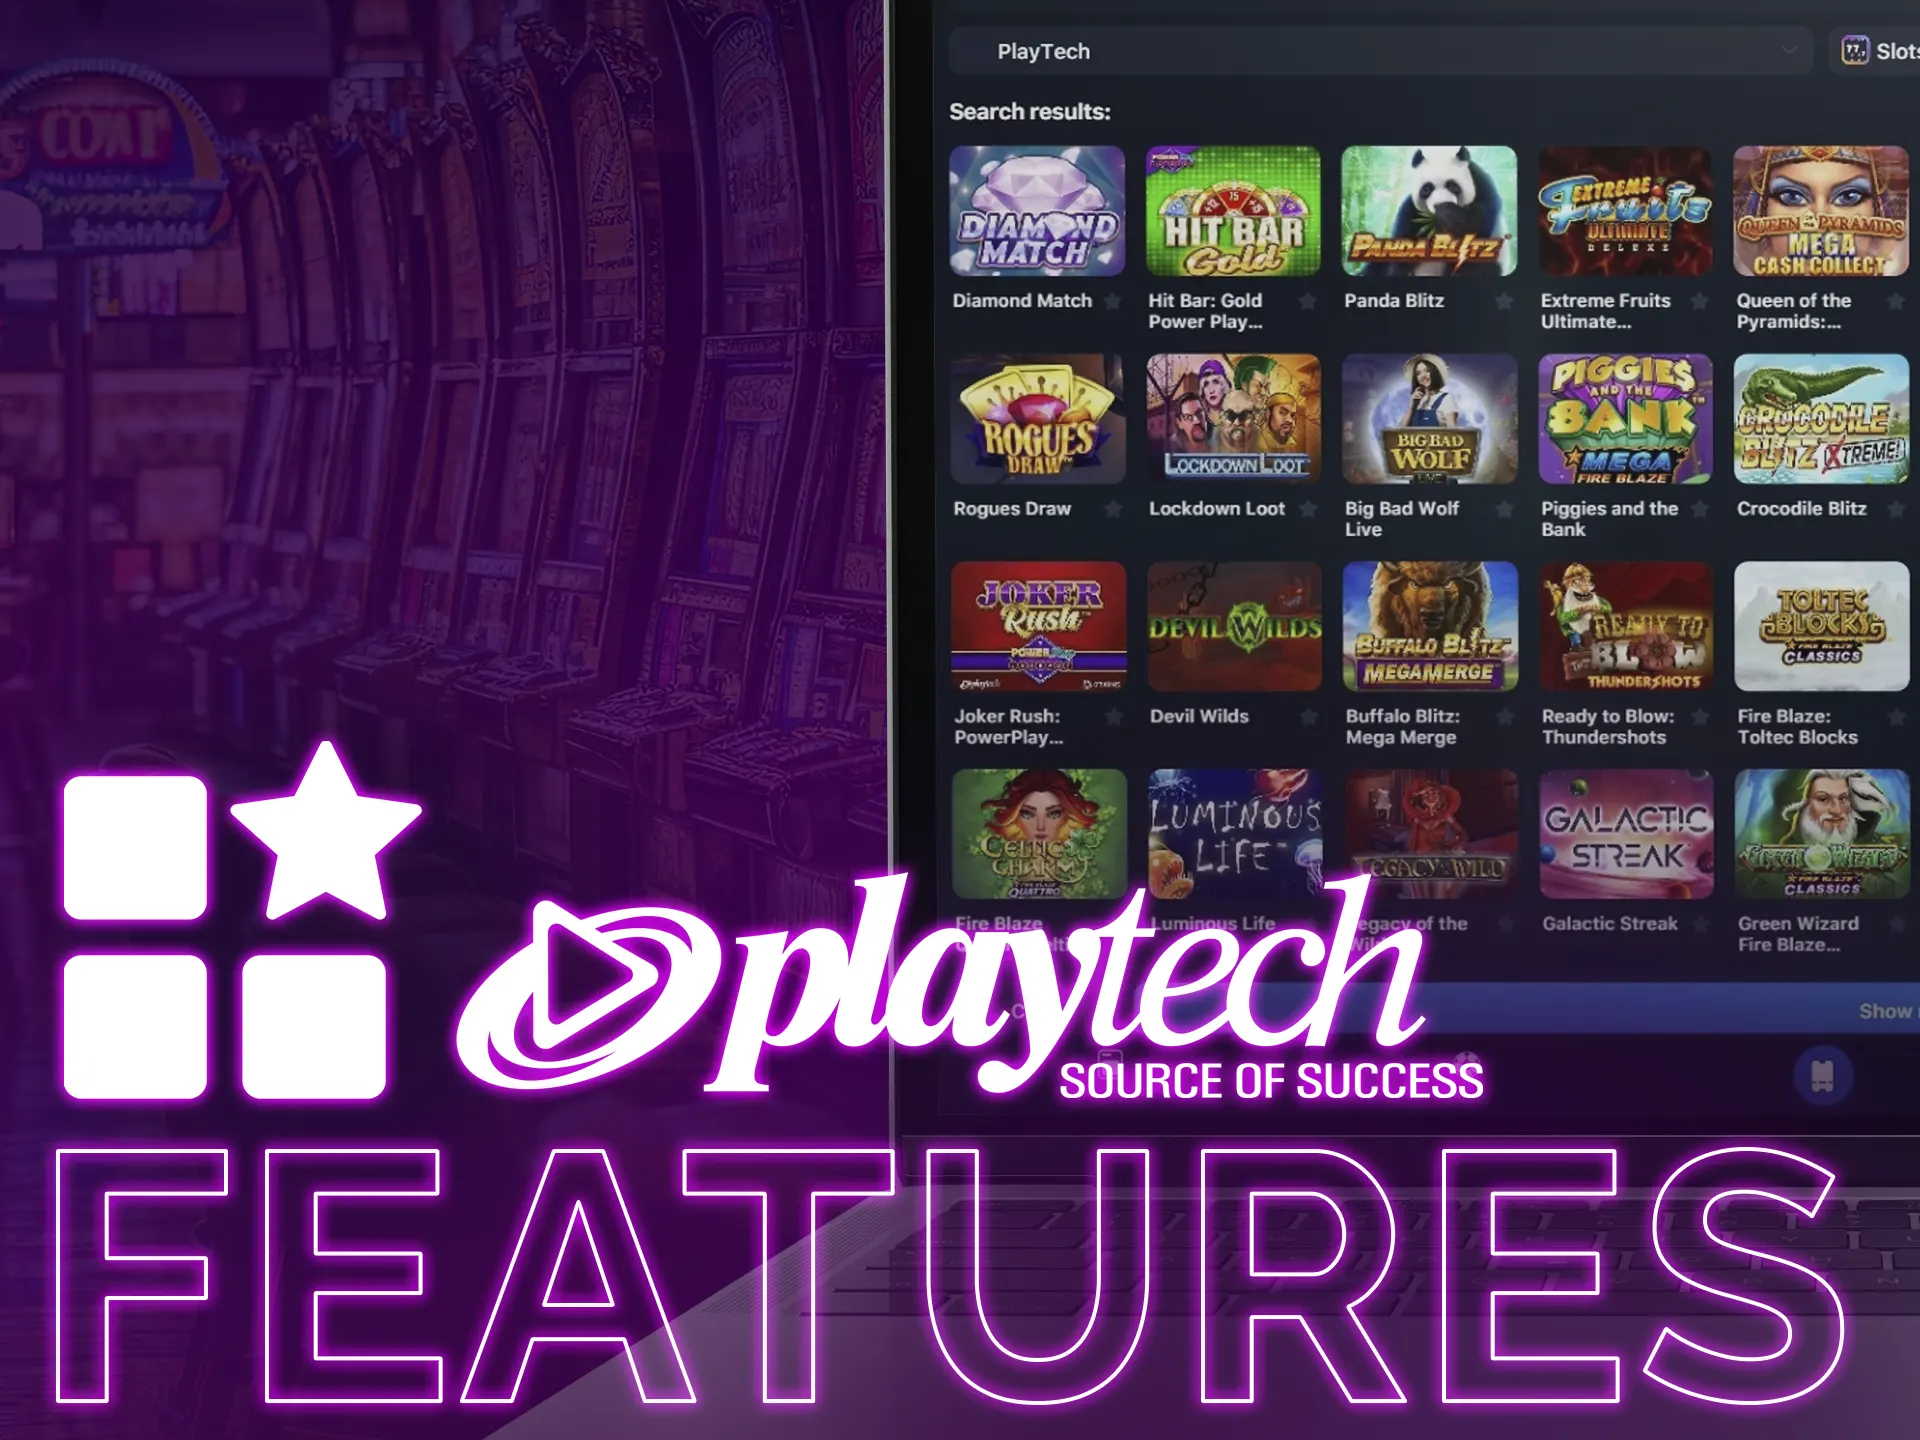 Find out more features about Playtech slot games.